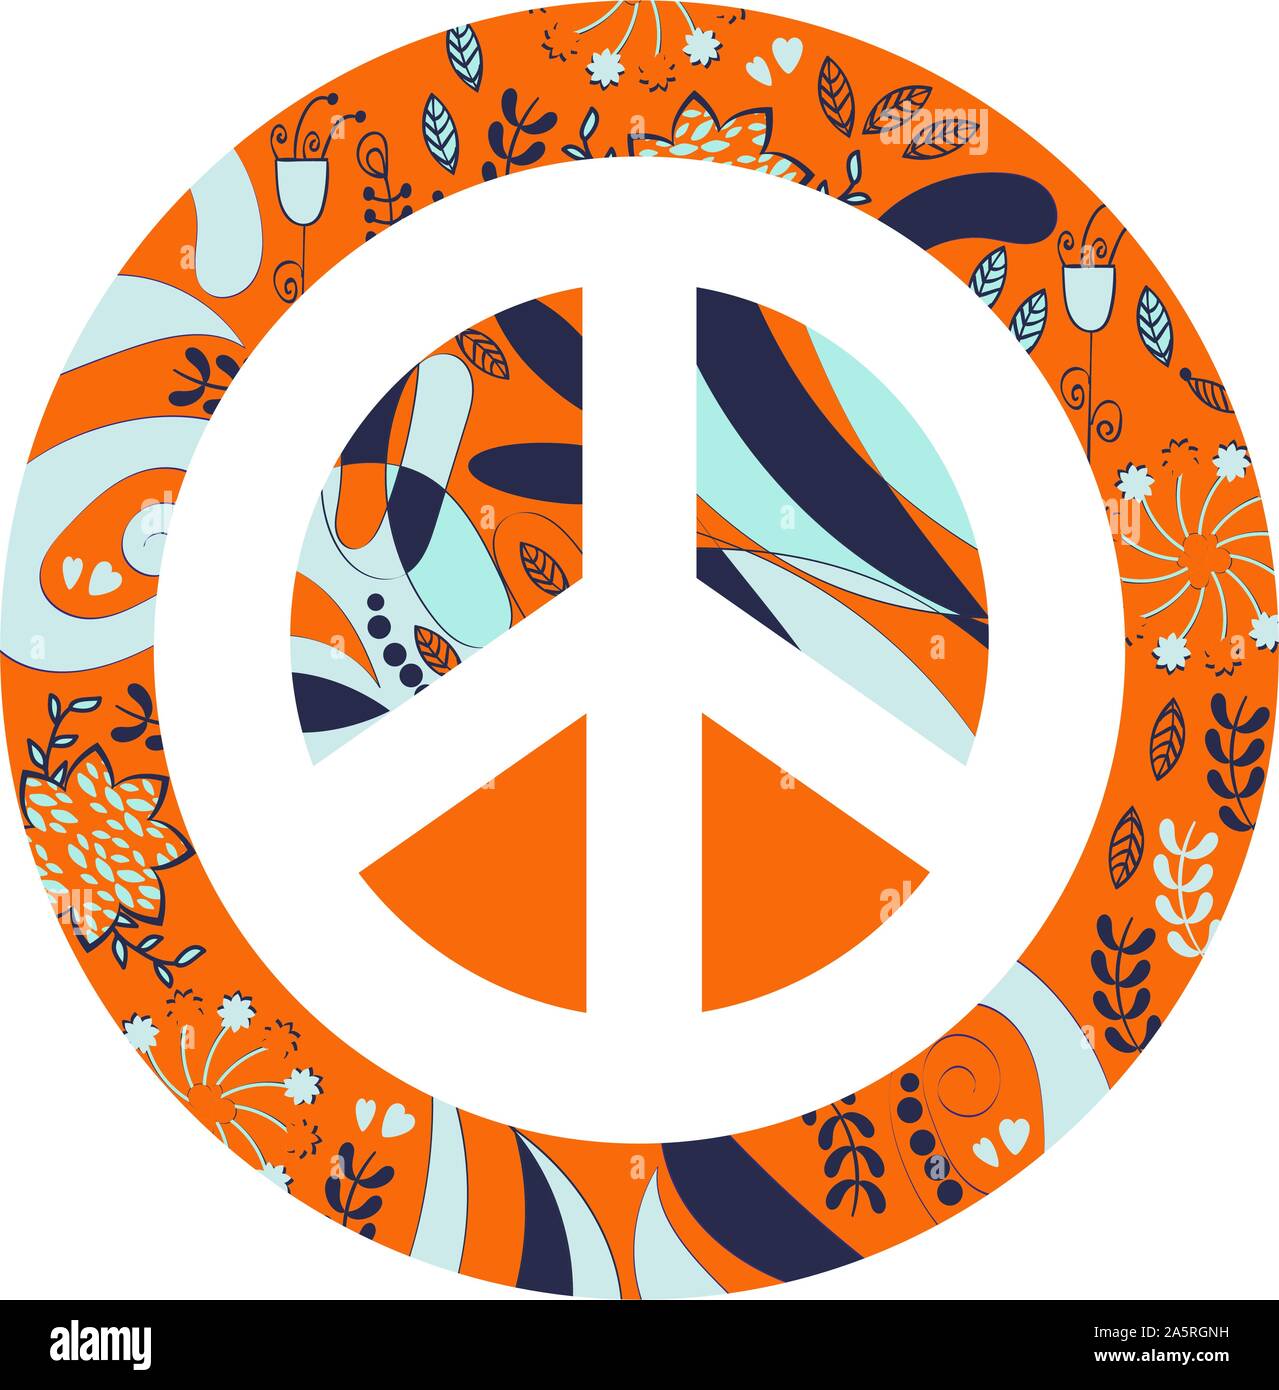 Floral and geometric shapes peace sign in vector. Abstract image for design Stock Vector